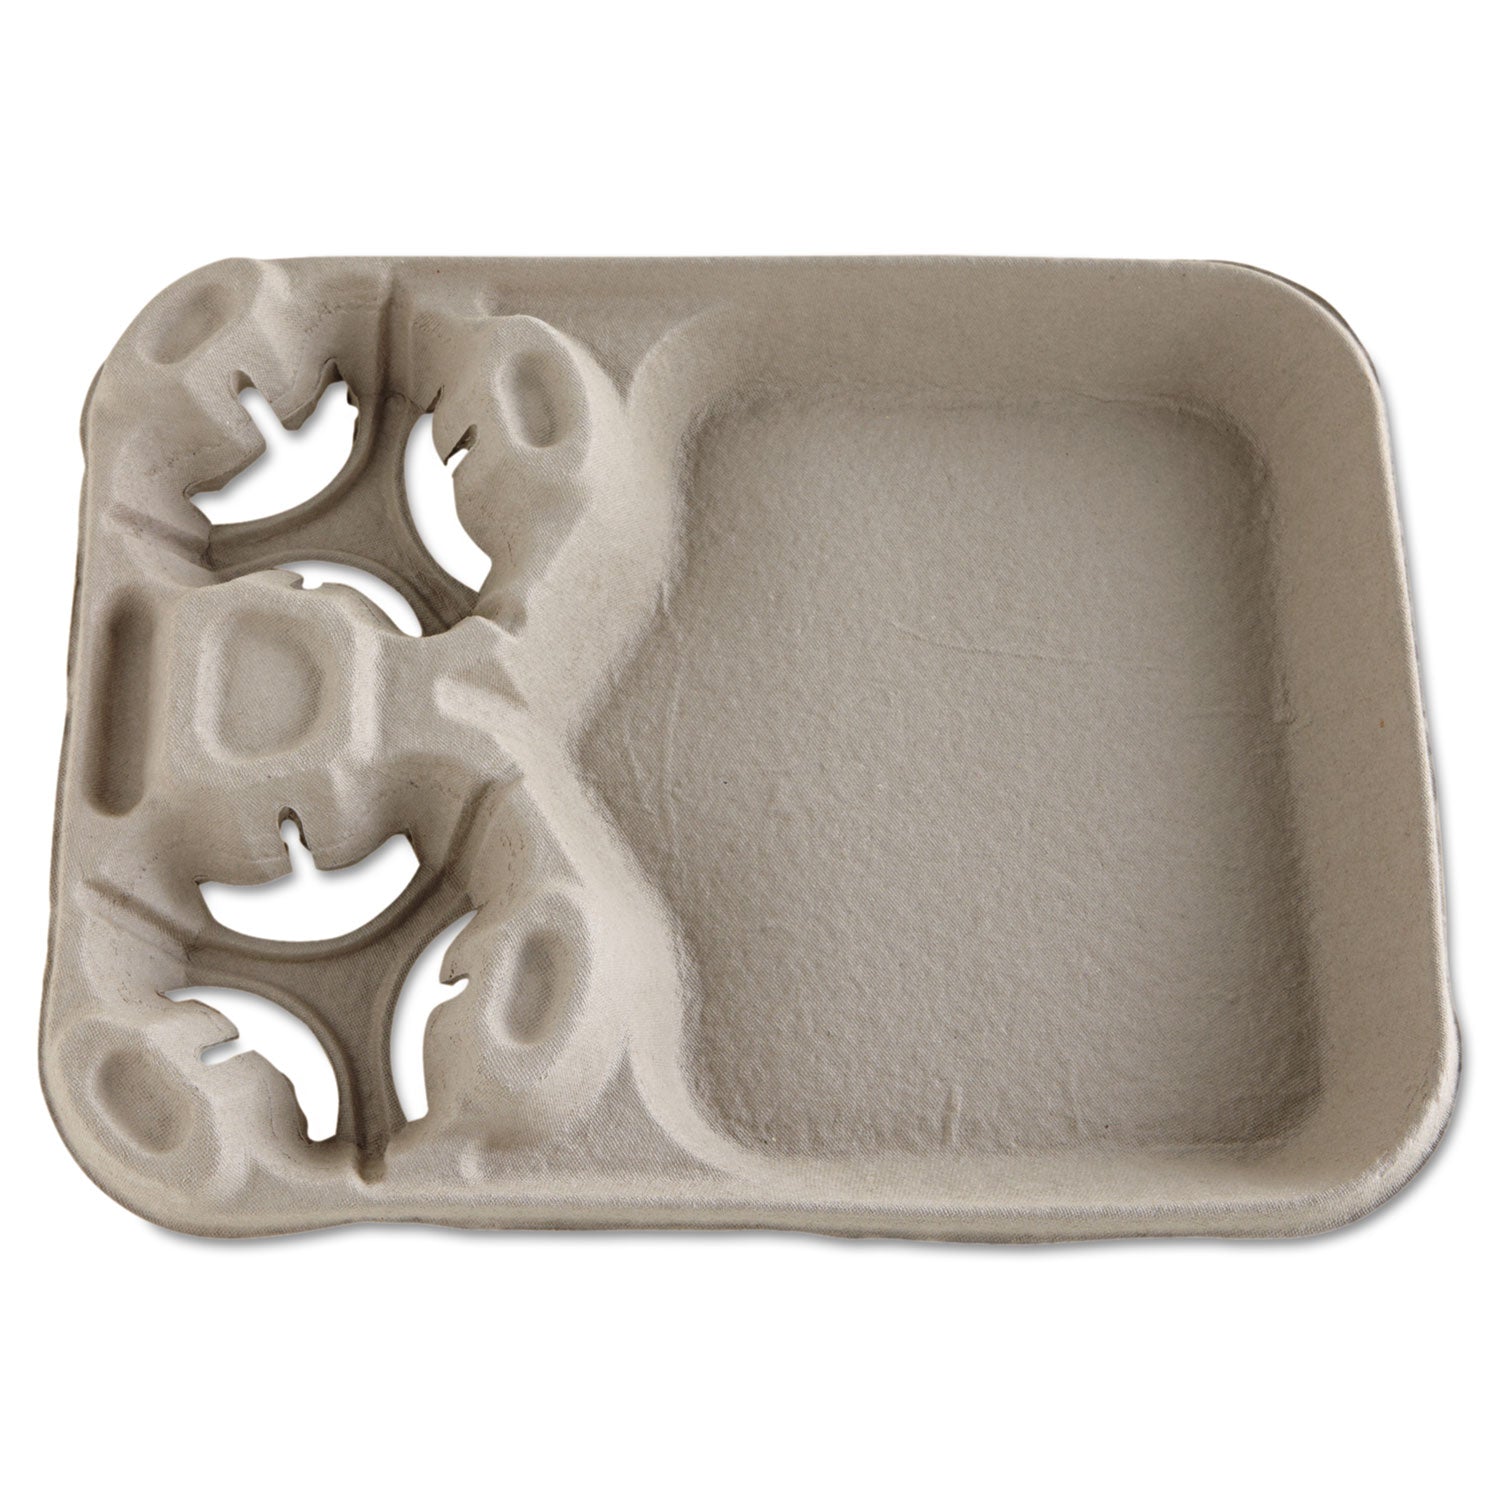 strongholder-molded-fiber-cup-food-trays-8-oz-to-44-oz-2-cups-beige-100-carton_huh20990ct - 1